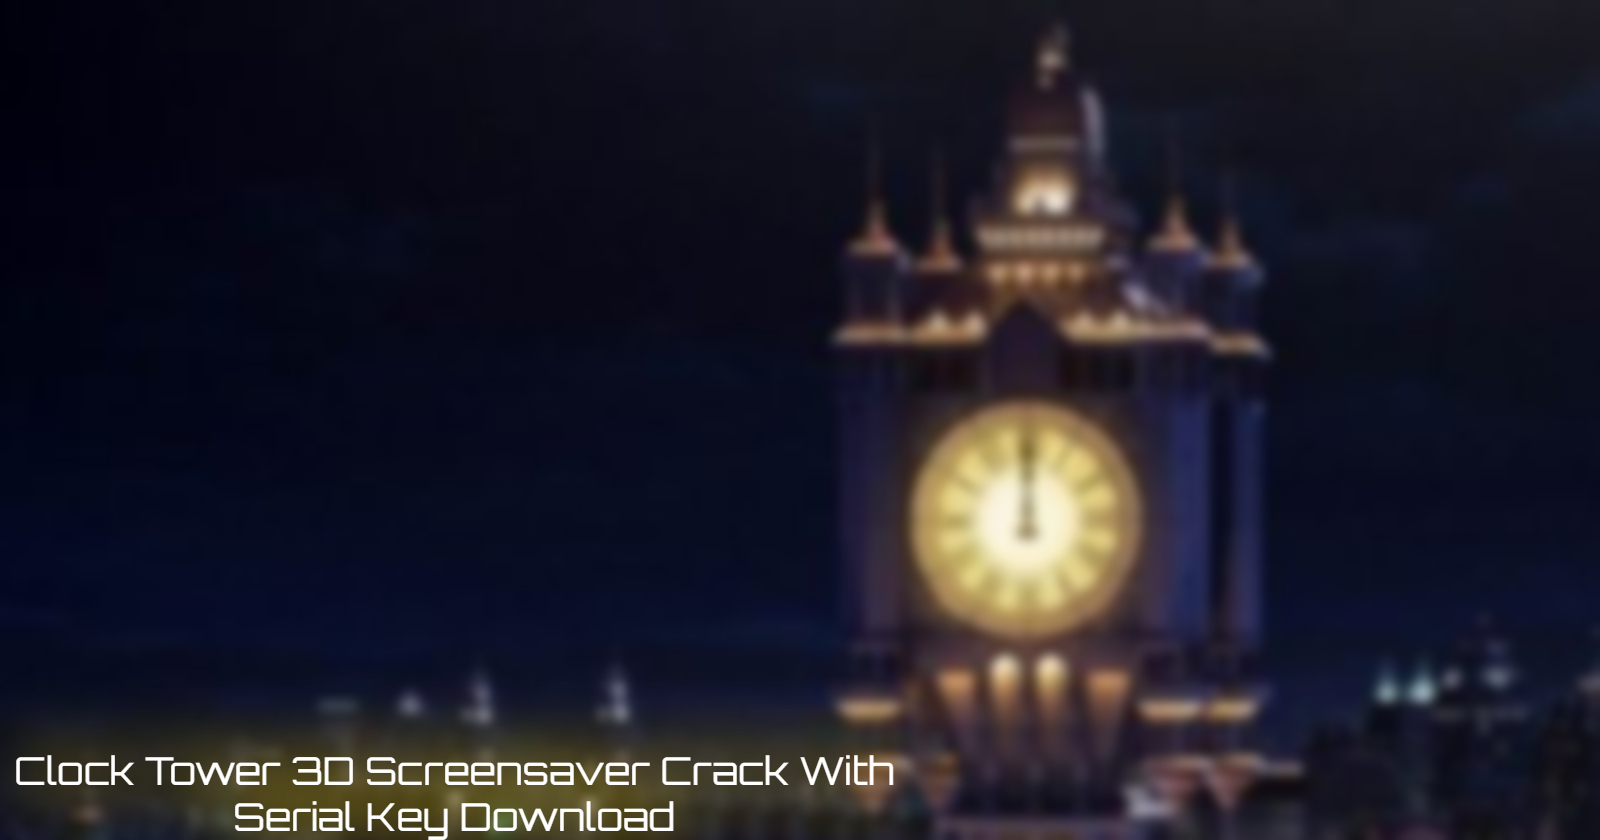 You are currently viewing Clock Tower 3D Screensaver Crack With Serial Key Download